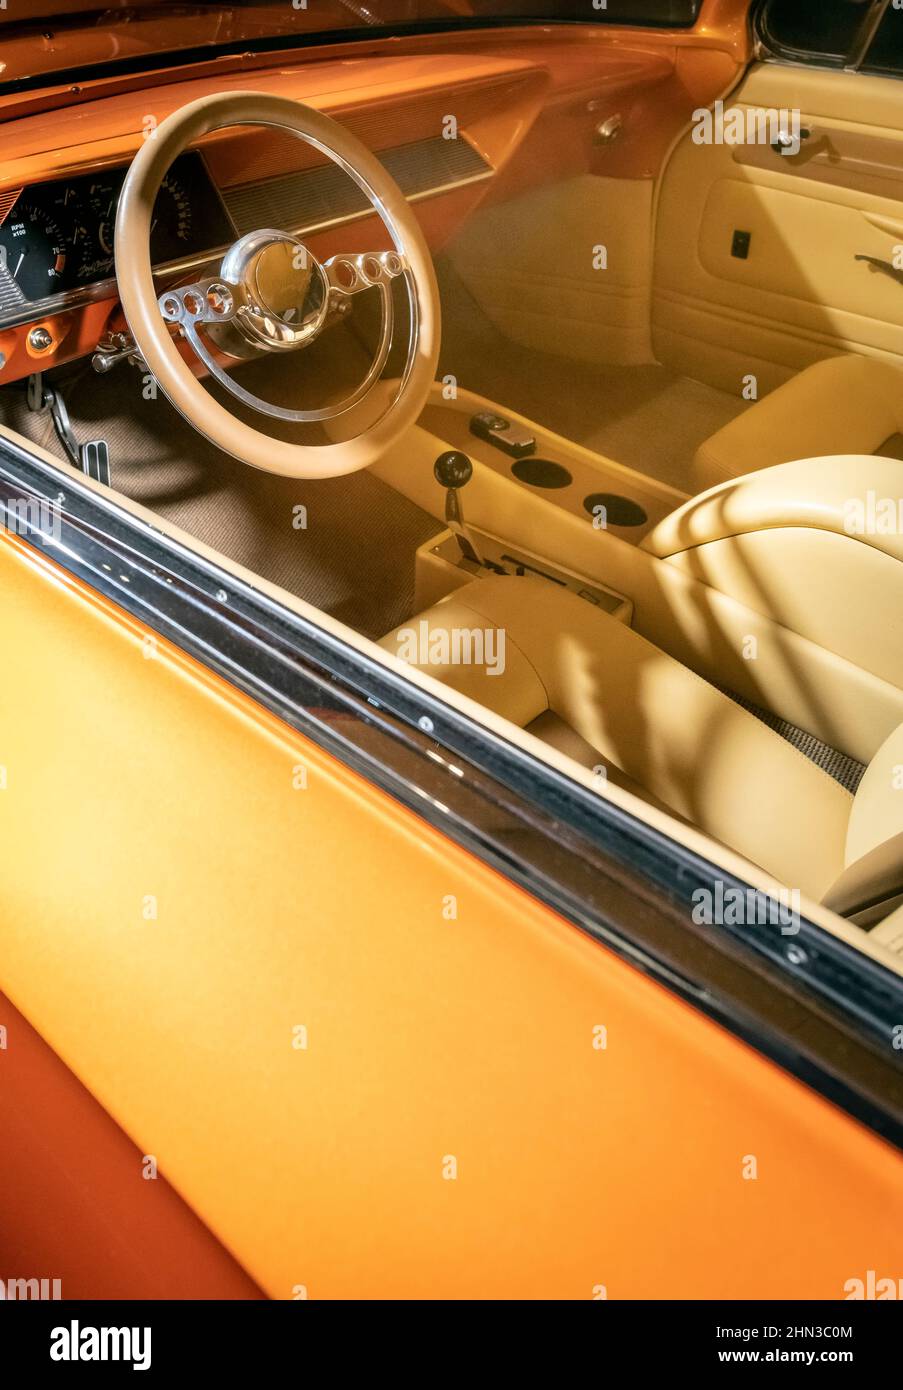 Interior of 1970-s American muscle car displayed at 2019 Toronto Autoshow Stock Photo